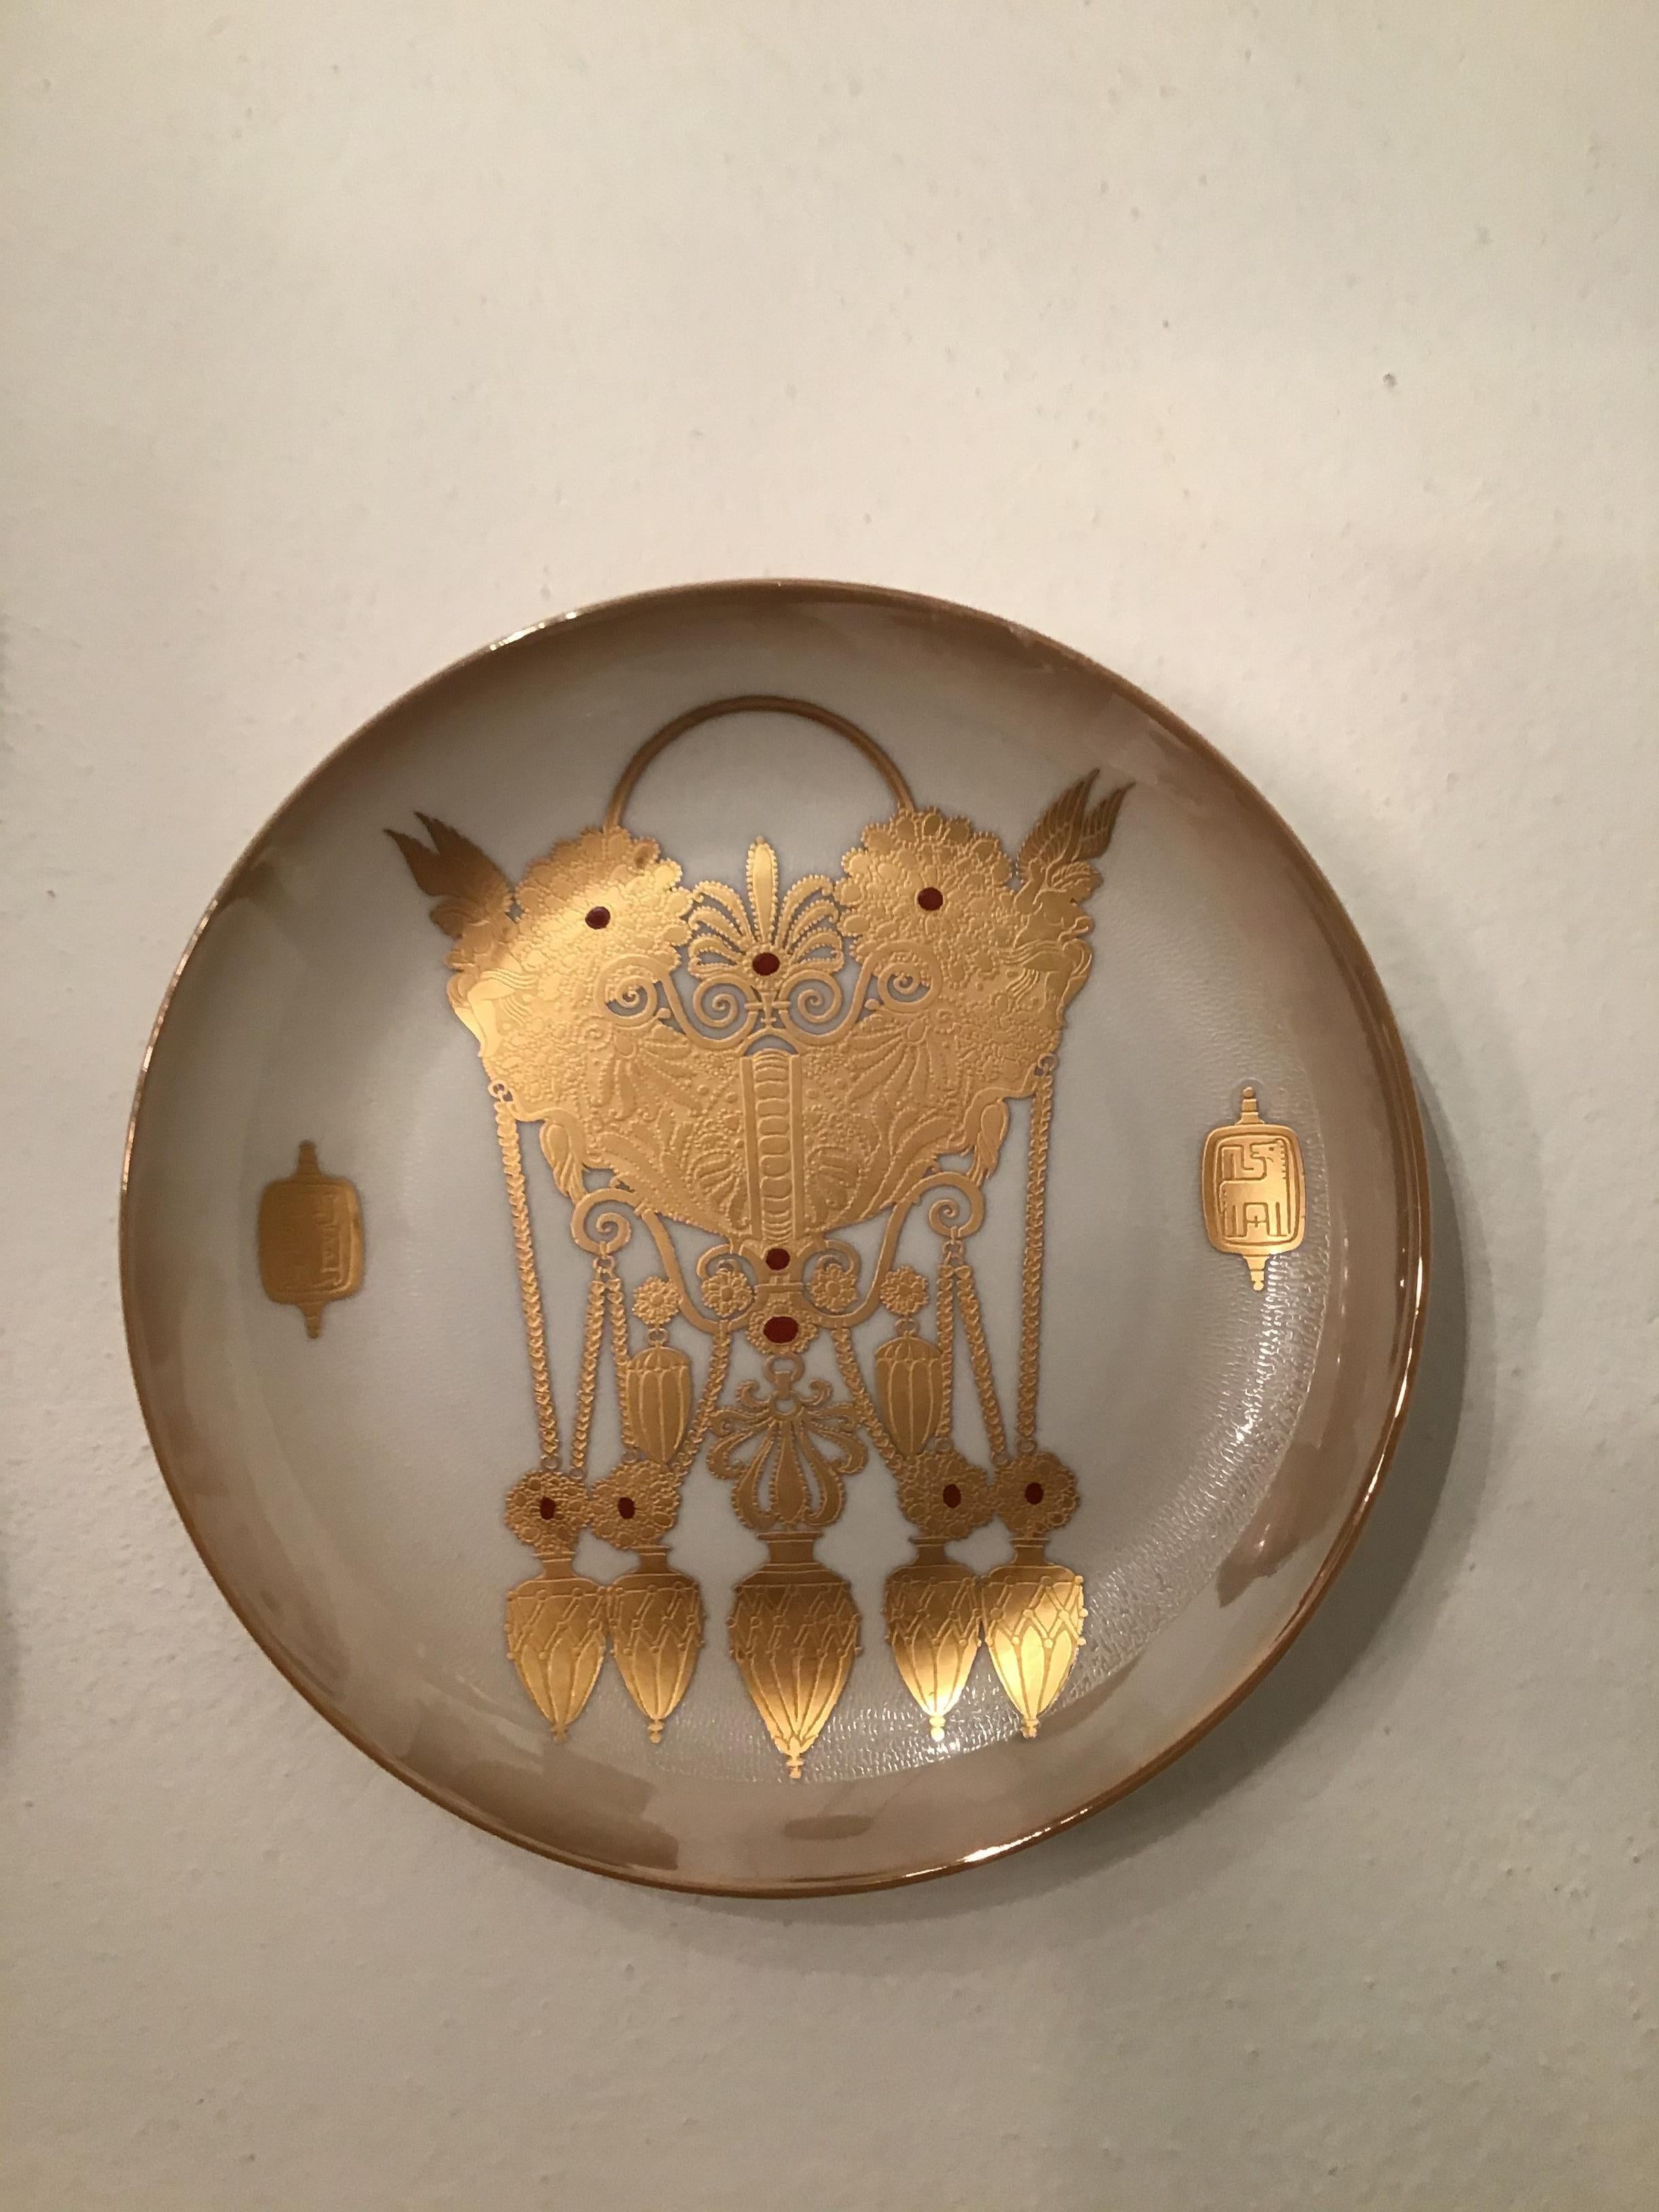 Other Morbelli Porcelain Wall Plate “Gioielli Italici”, 1987 Italy  For Sale